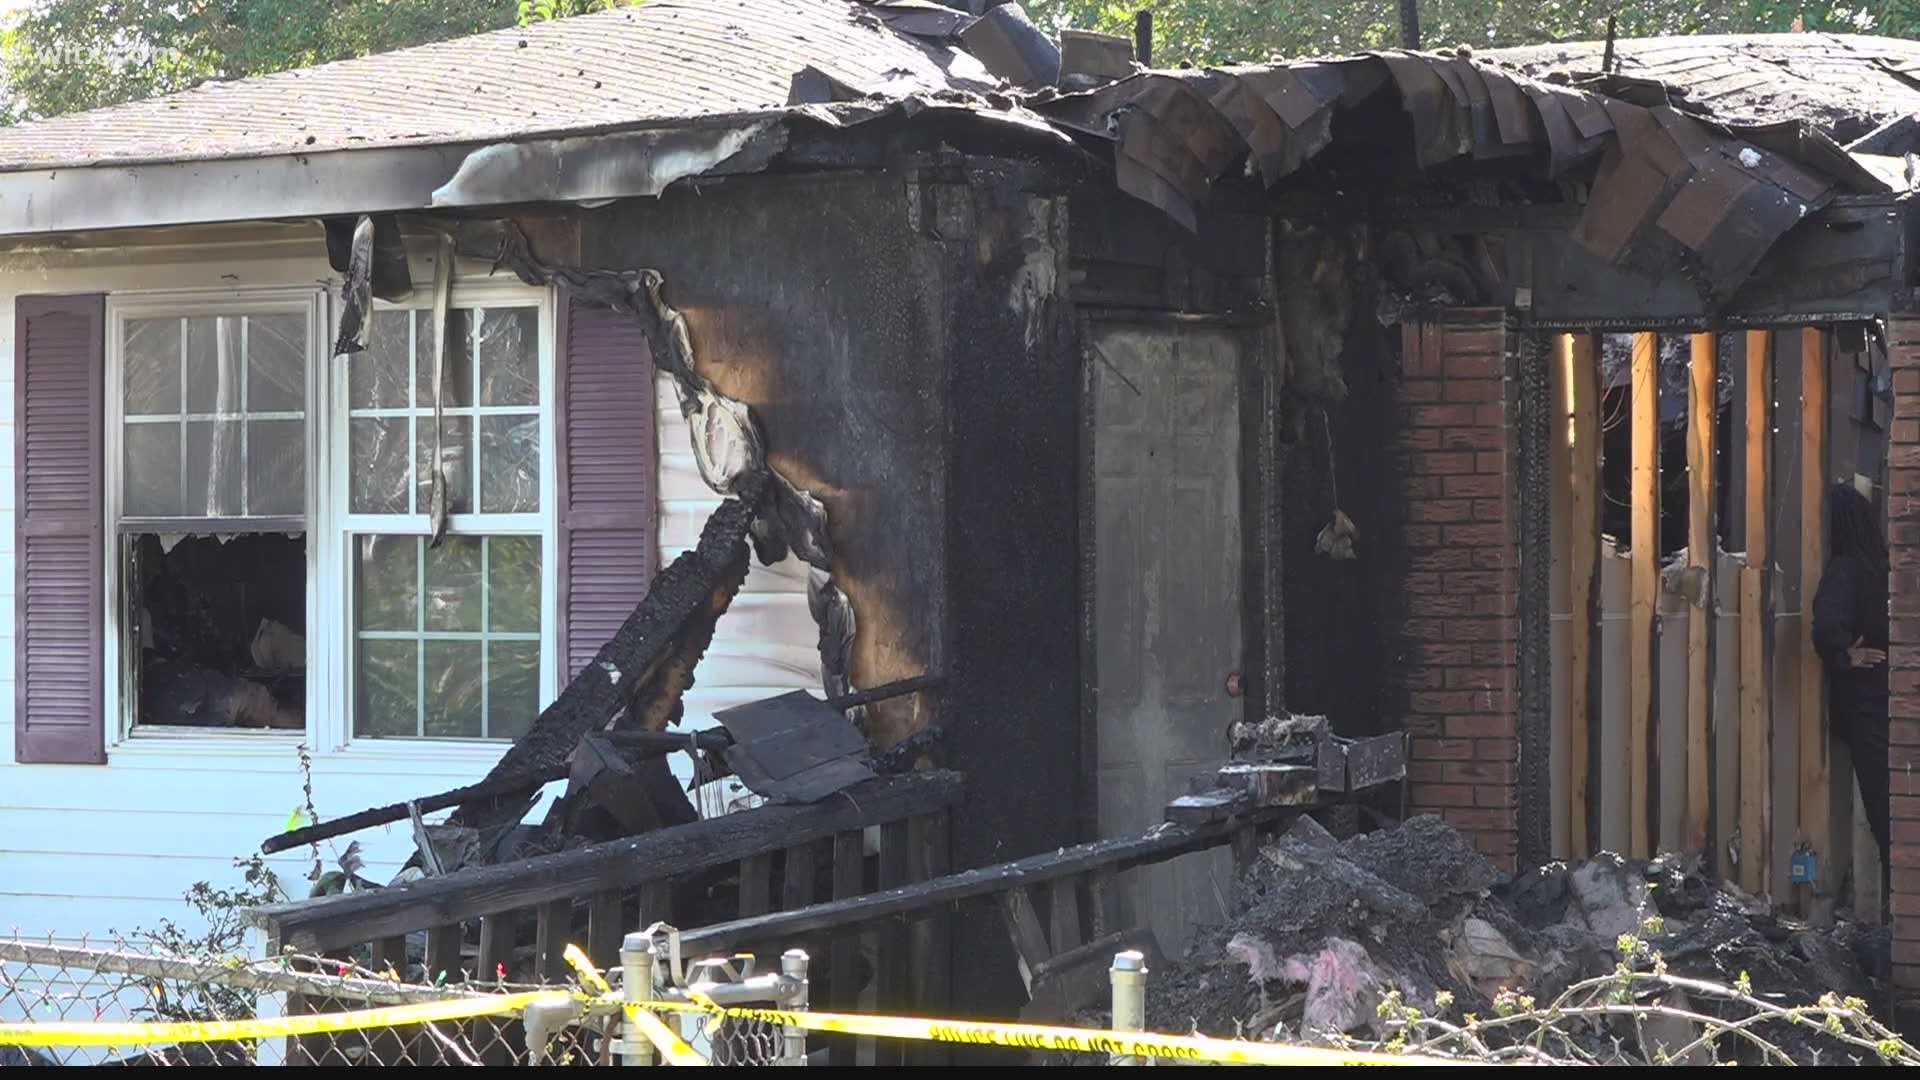 Law enforcement are investigating a house fire in Kershaw County that left two people dead.